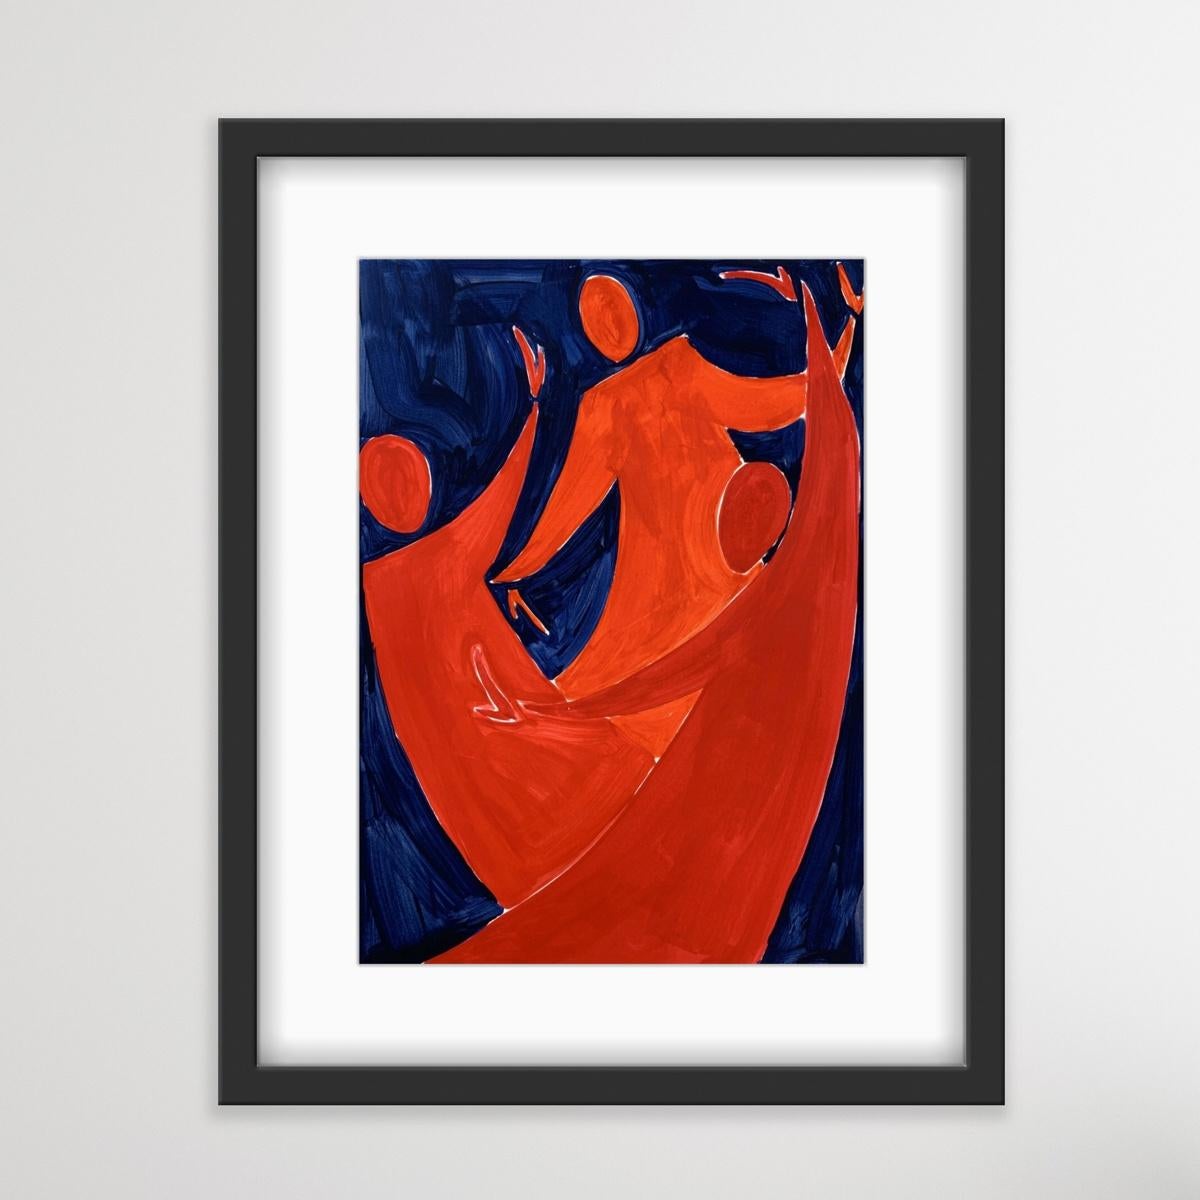 A dance - Figurative Painting on Paper, Young art, Colorful, Vibrant For Sale 1